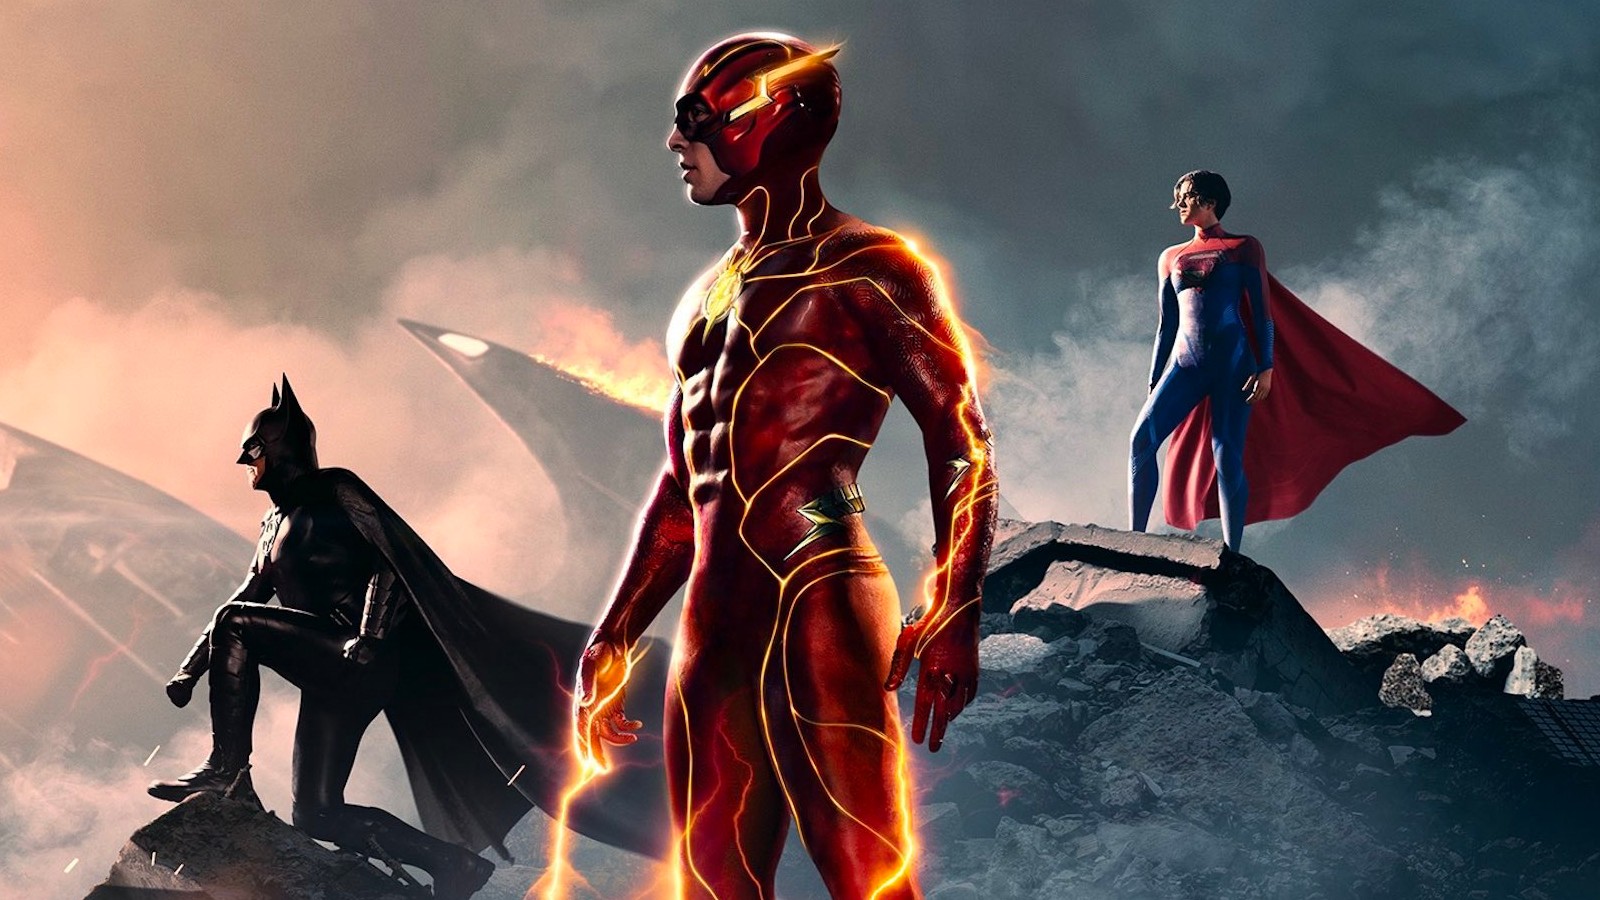 The Flash reviews: First reactions hail it as “one of the best